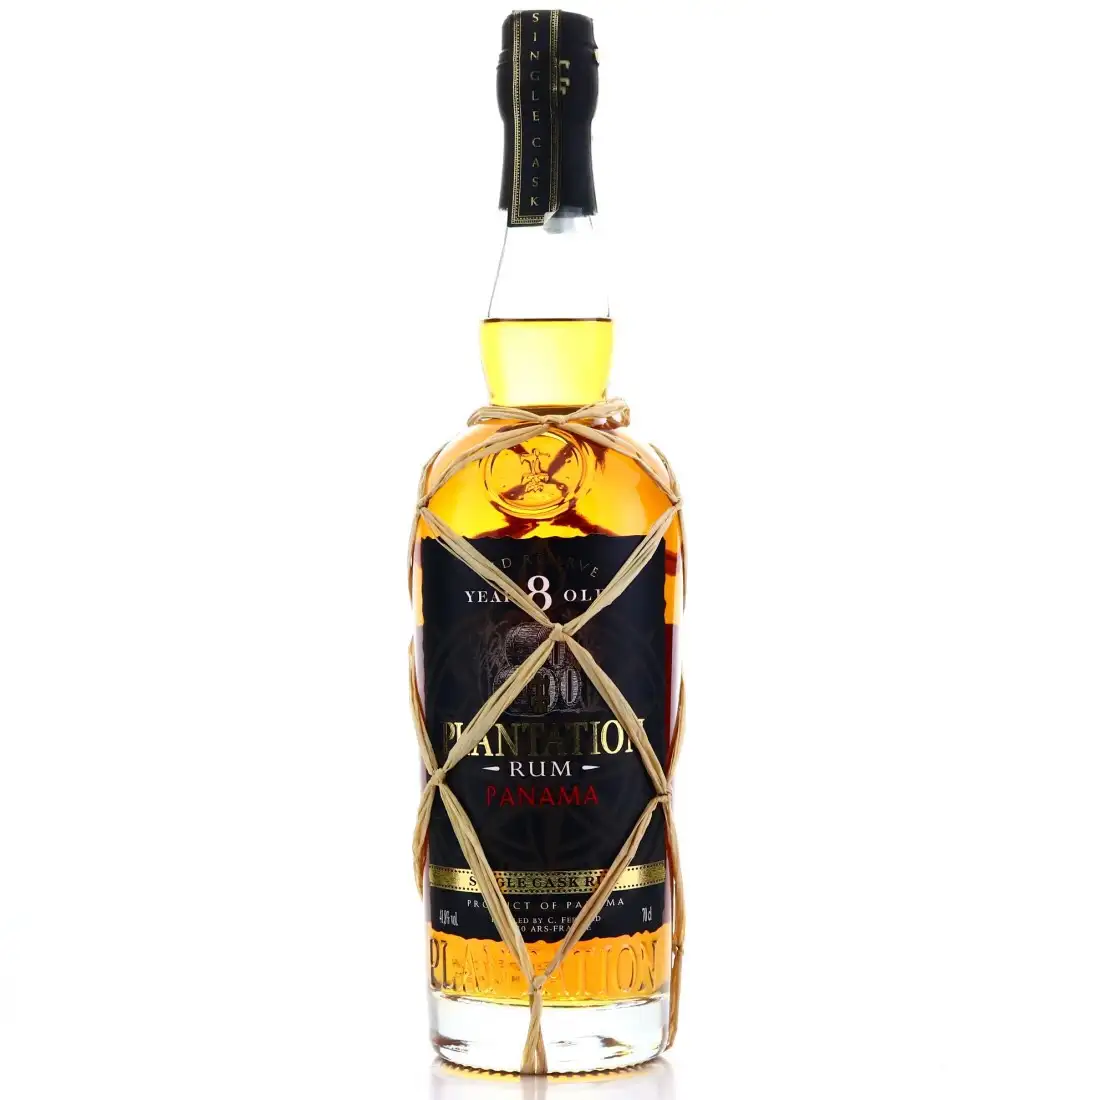 Image of the front of the bottle of the rum Plantation Old Reserve Single Cask